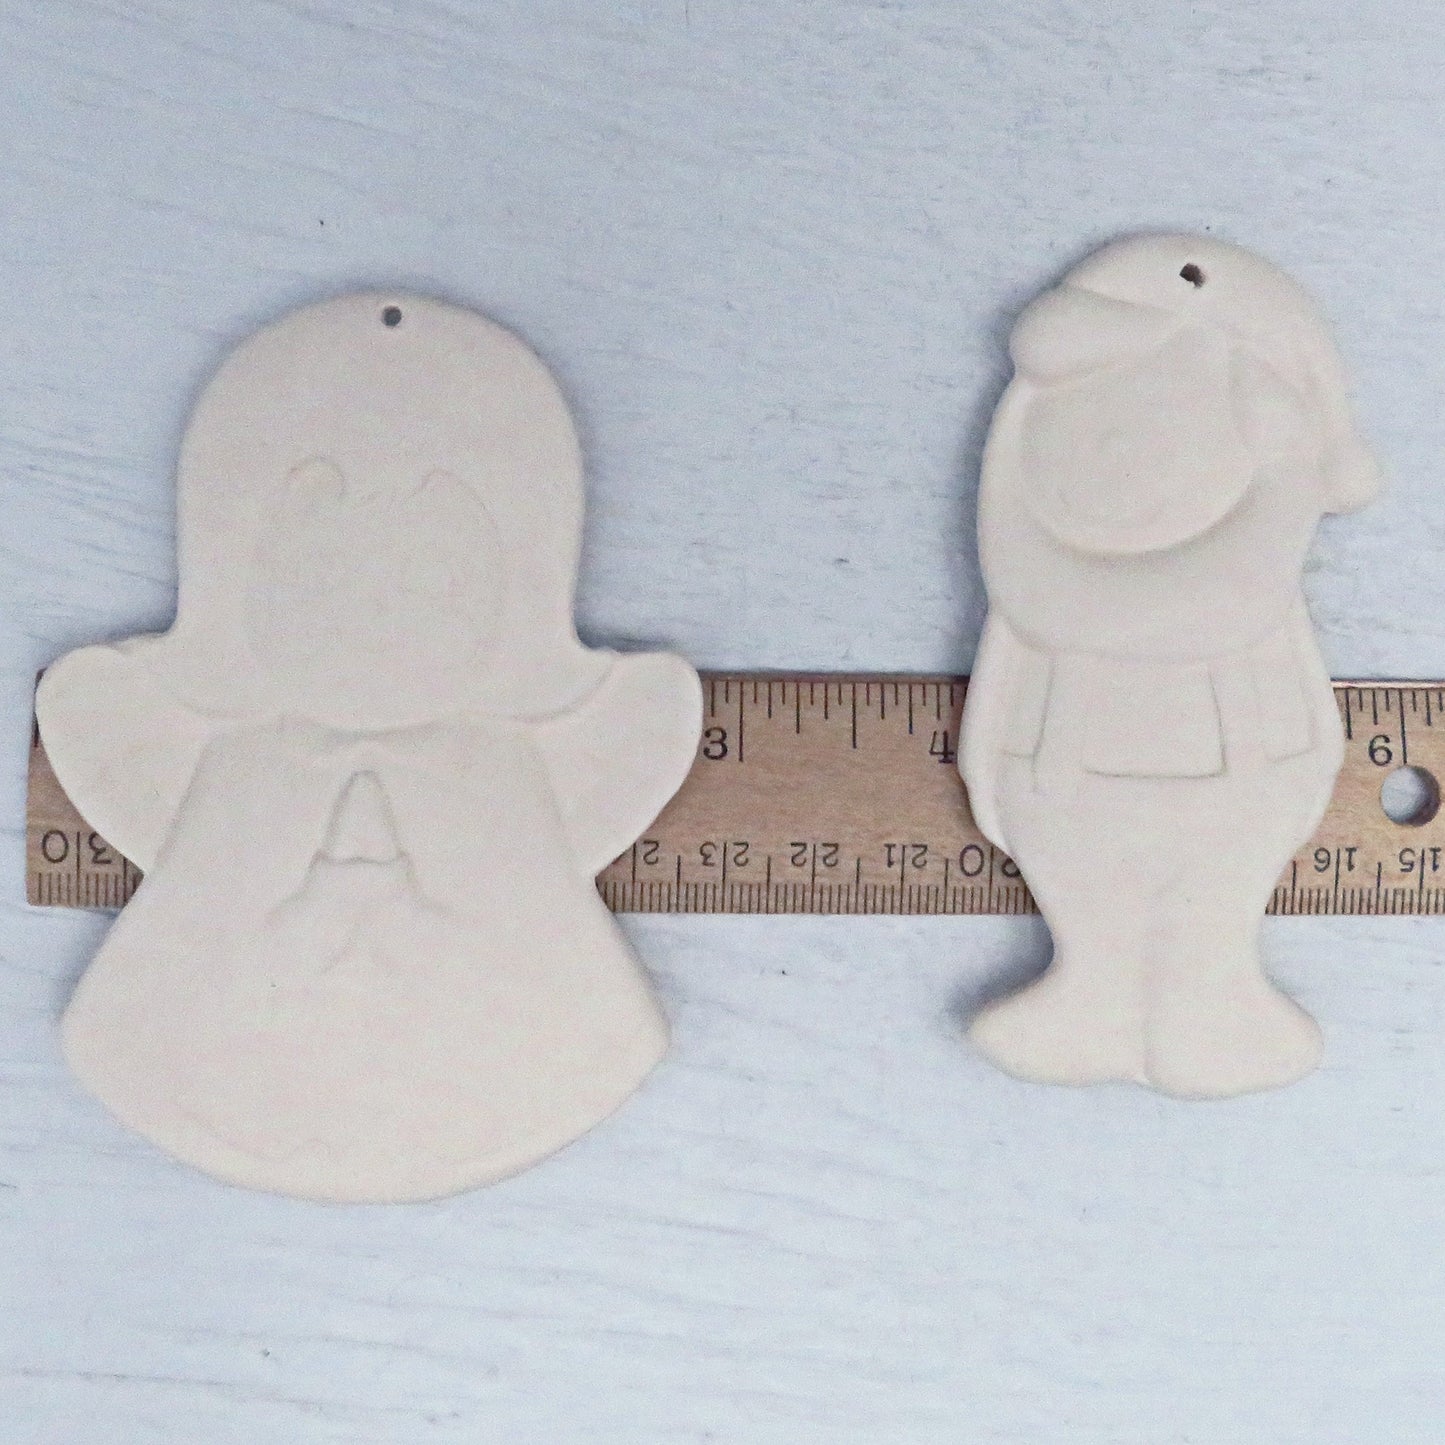 Handmade Unpainted Ceramic Christmas Tree Ornaments for Christmas Decor, Ready to Paint Angel and Elf Ornaments